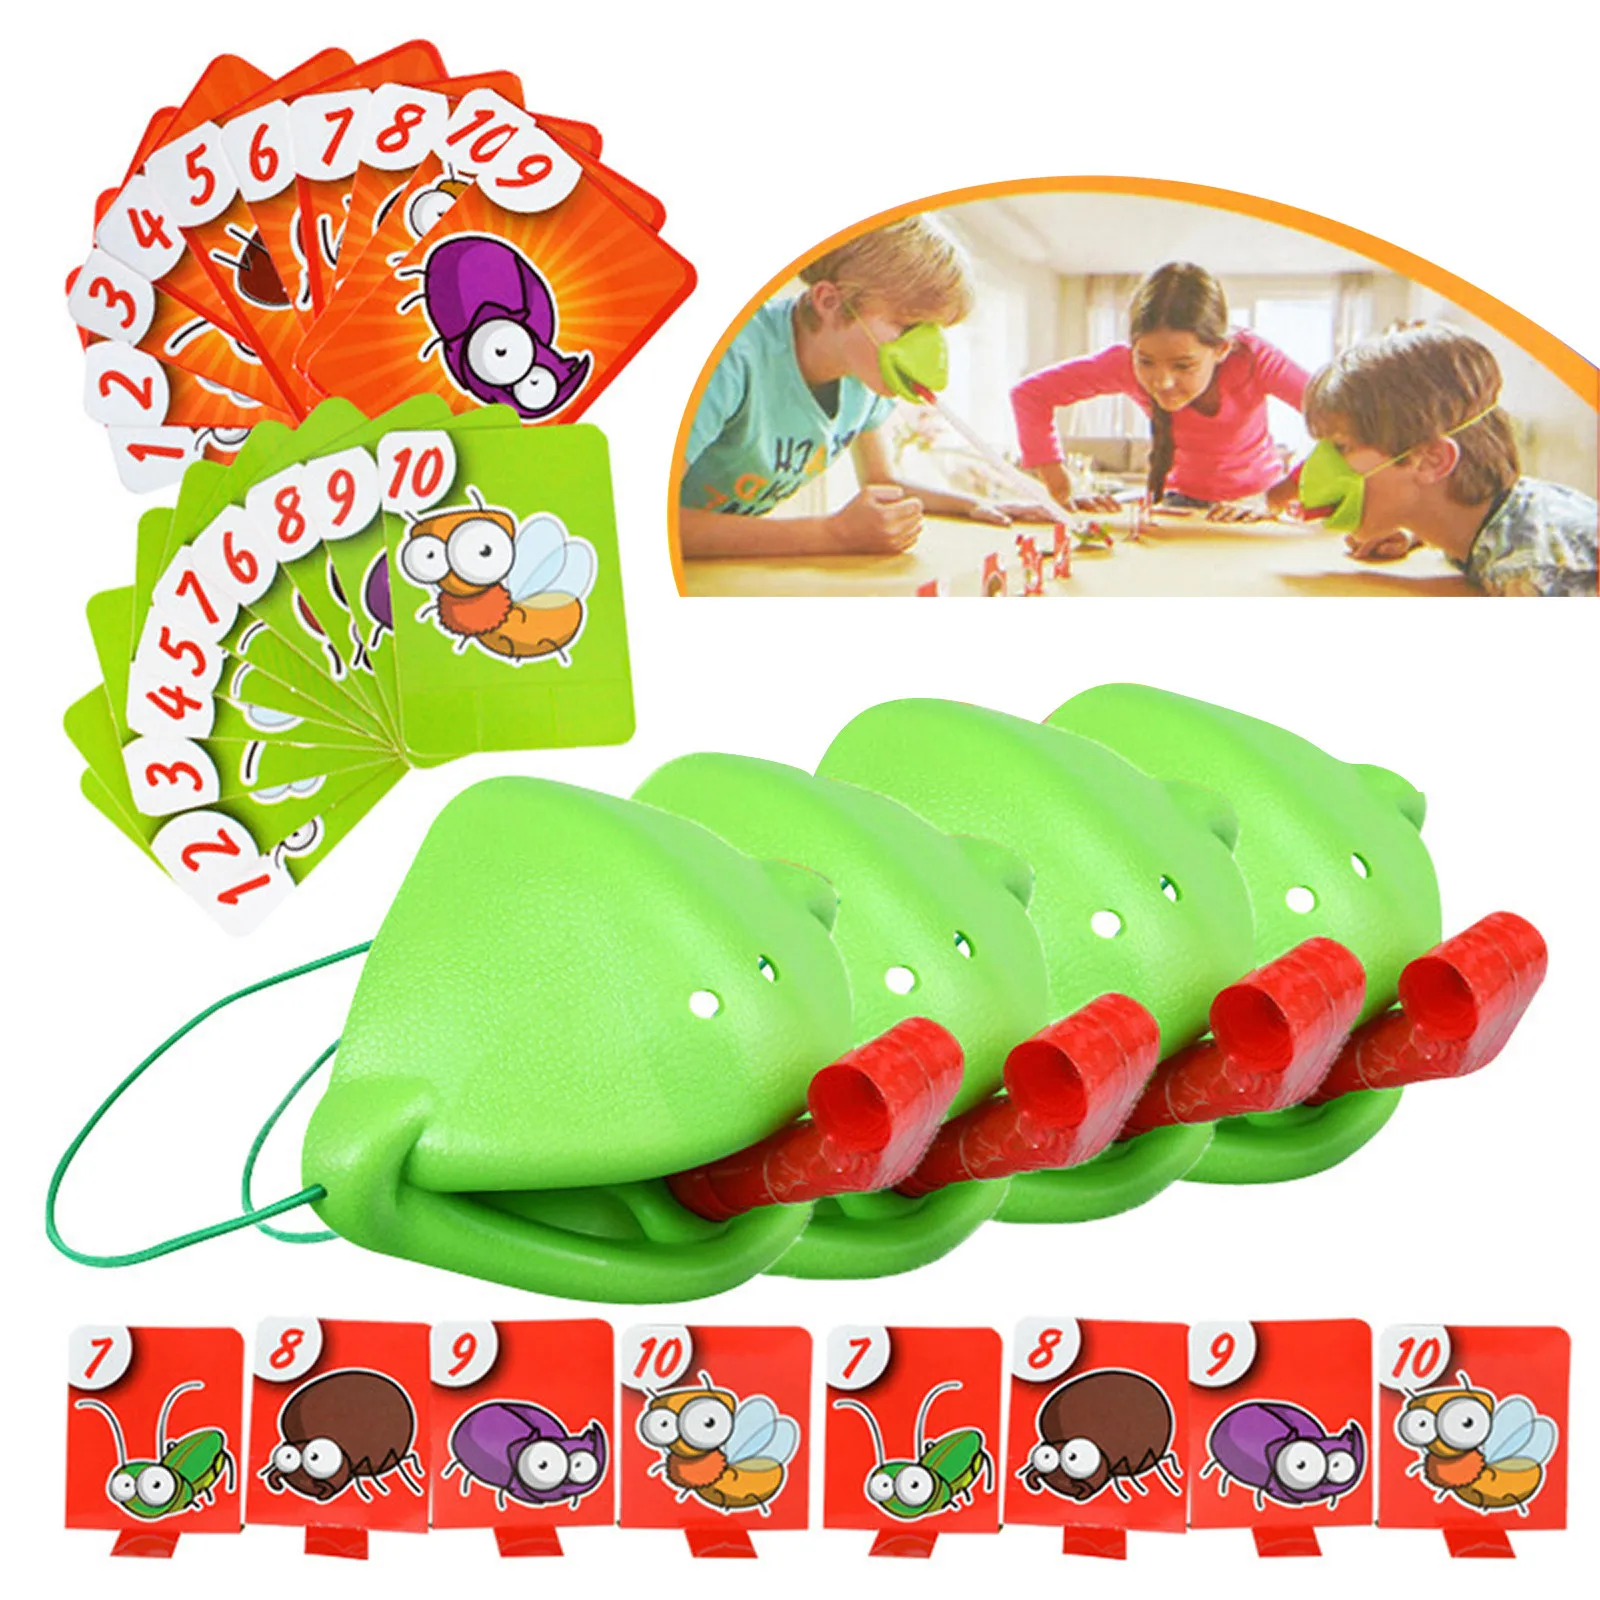 

2021 NEW Tongue Chameleon Frog Mouth Take Card Tongue Family Party Toy Be Quick To Lick Cards Toy Set Funny Board Game